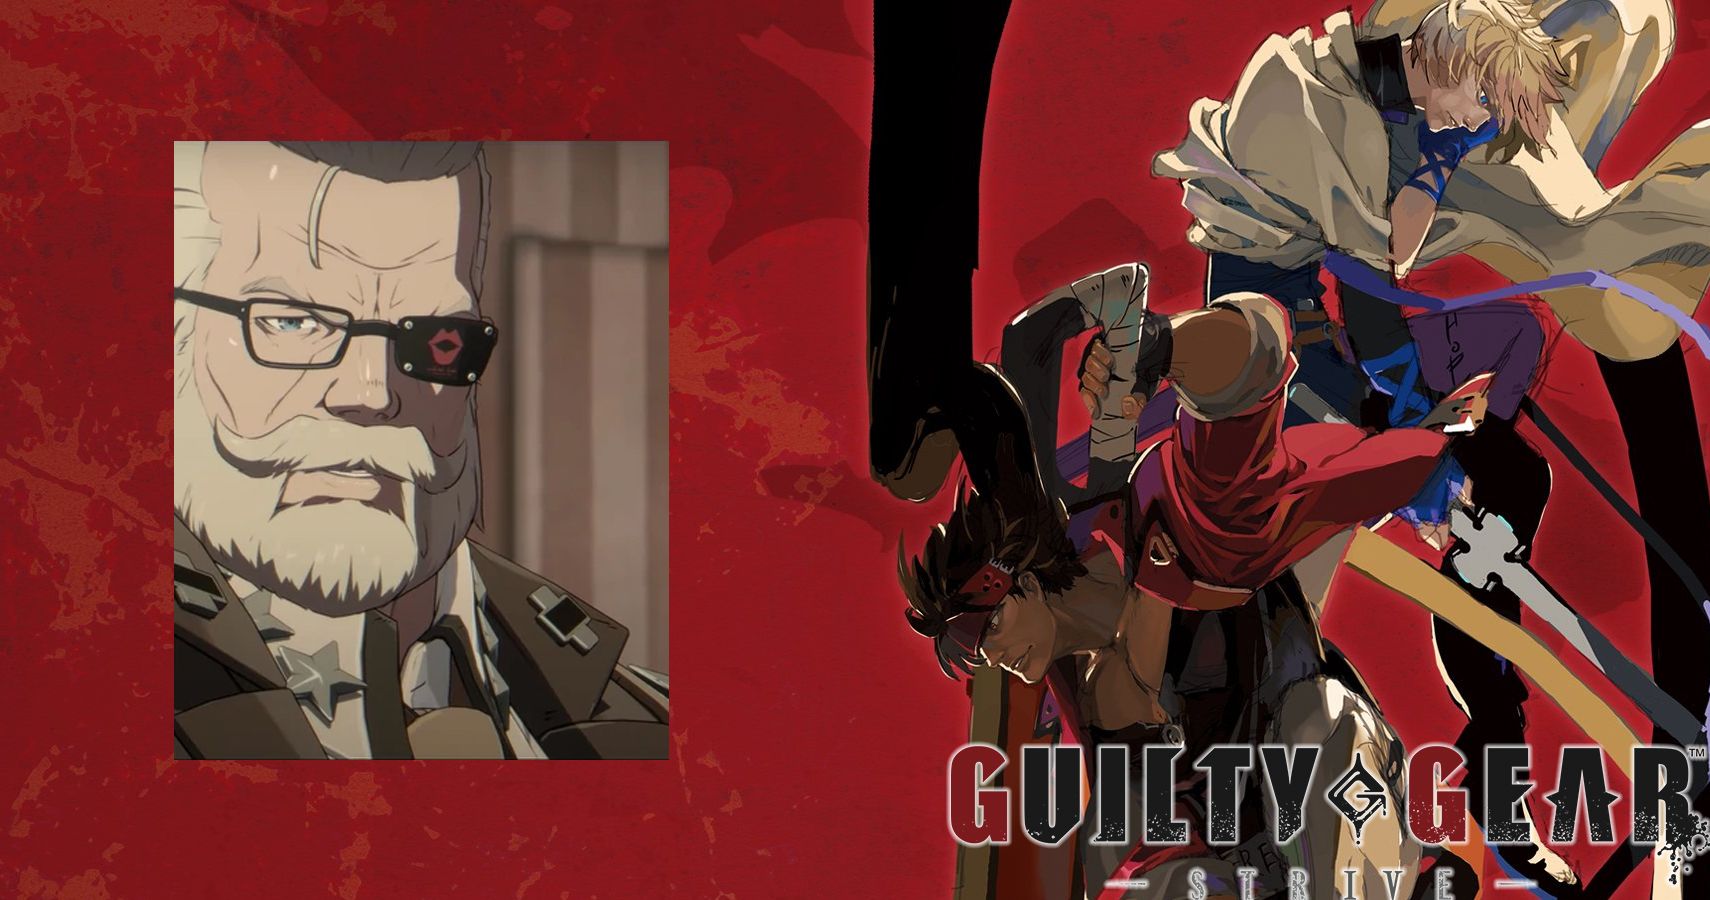 DLC #1 LEAKED Goldlewis Dickinson - Guilty Gear Strive * I TOLD YOU * 